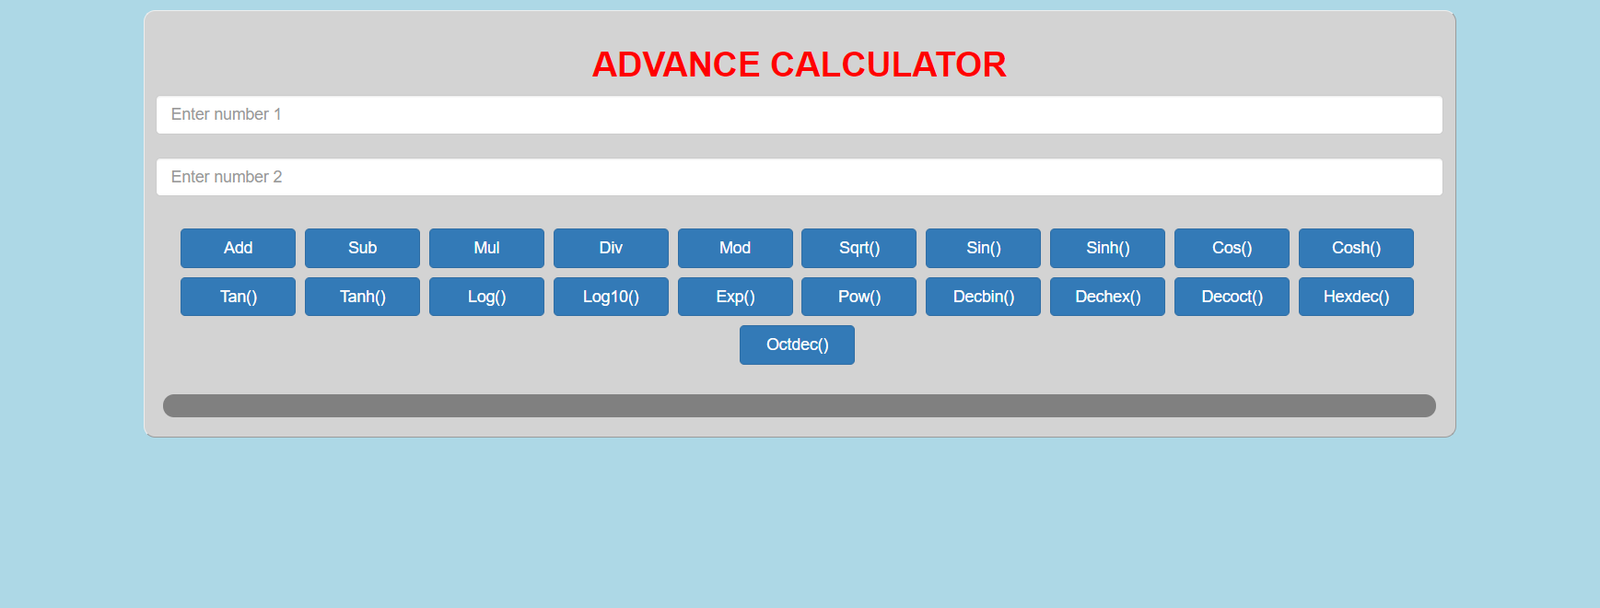 Advance Calculator In PHP With Source Code